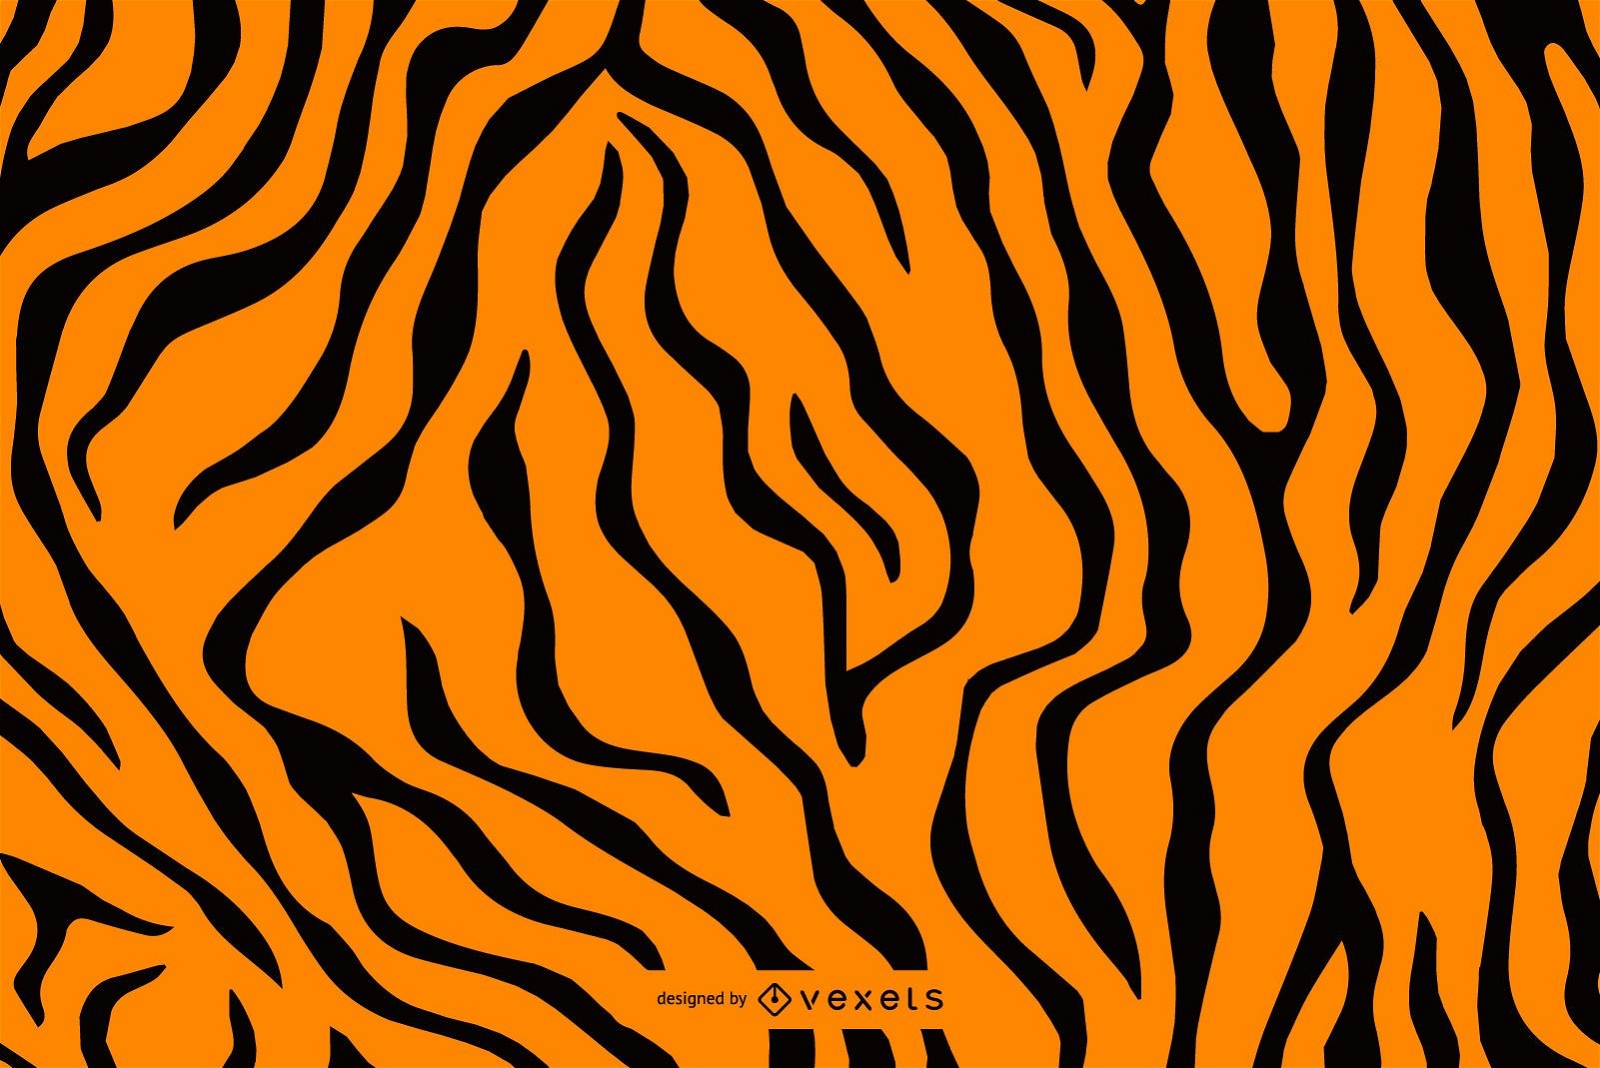 https://images.vexels.com/content/151468/preview/seamless-tiger-stripes-pattern-b1a4a3.png